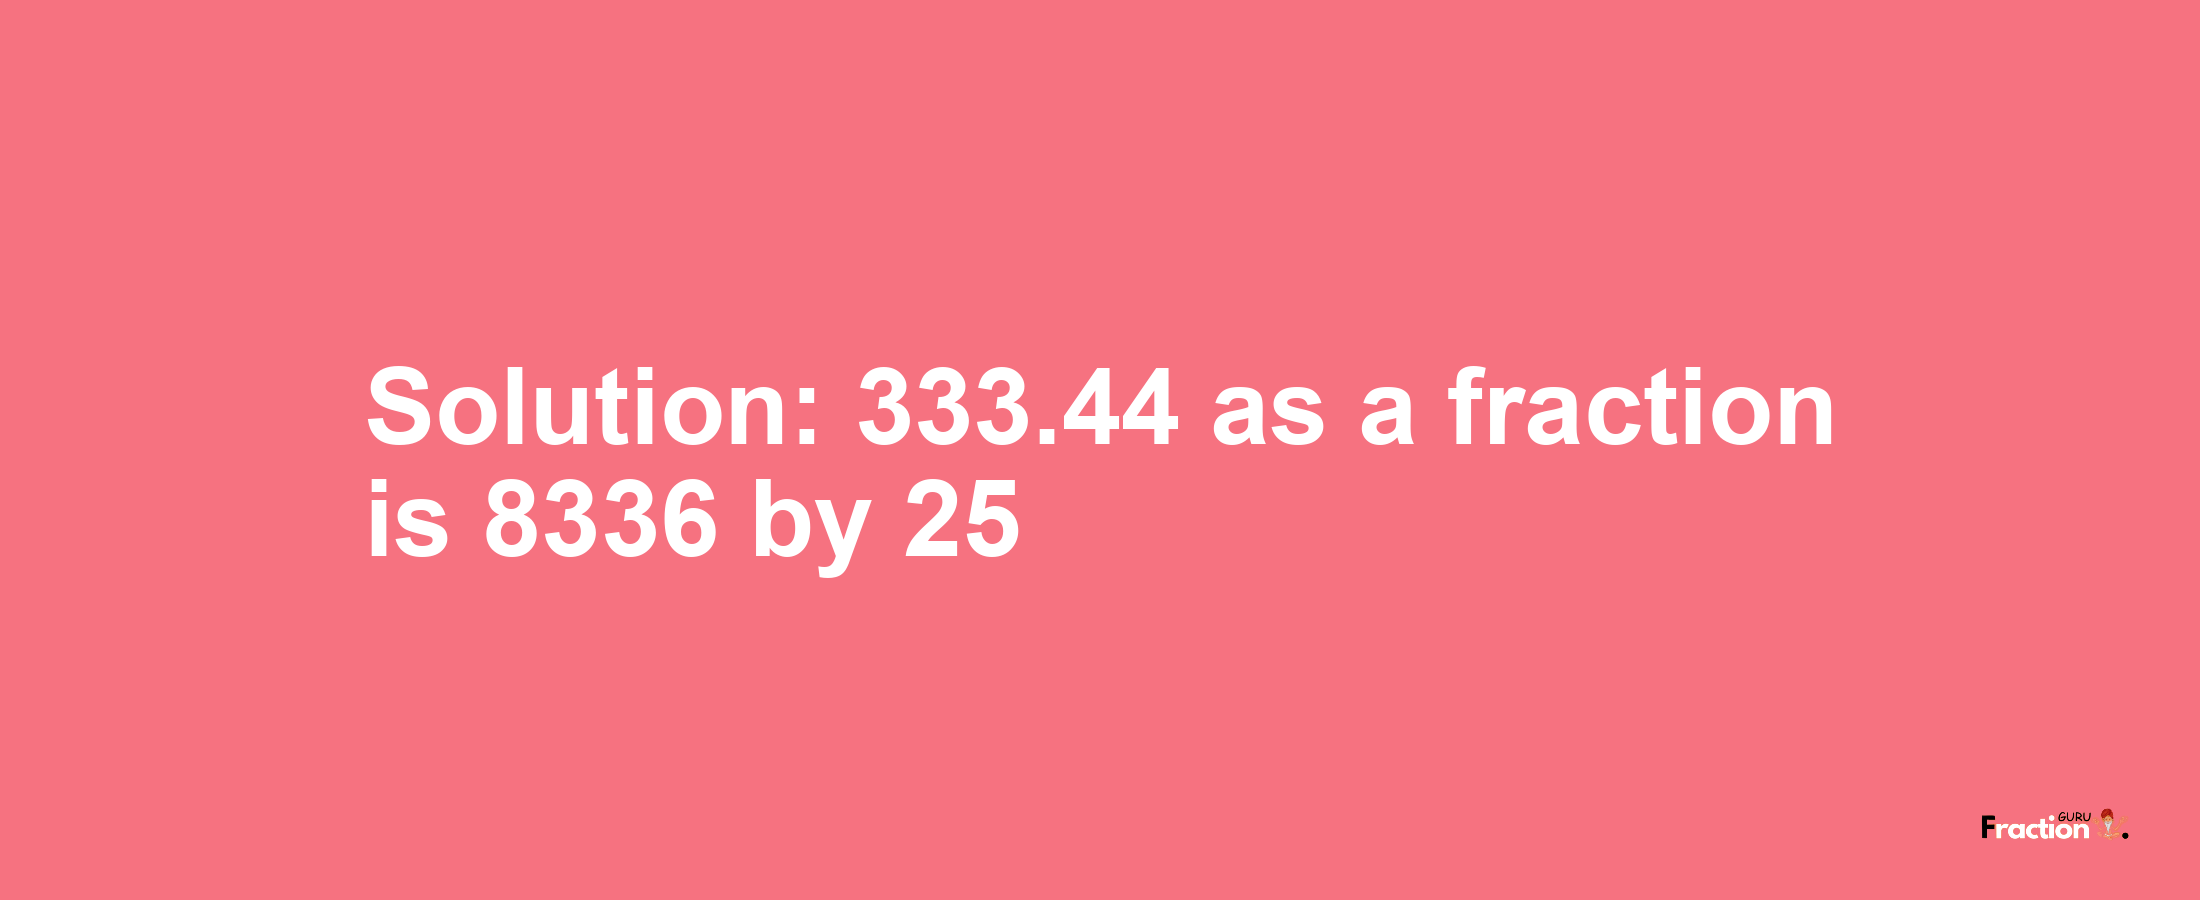 Solution:333.44 as a fraction is 8336/25